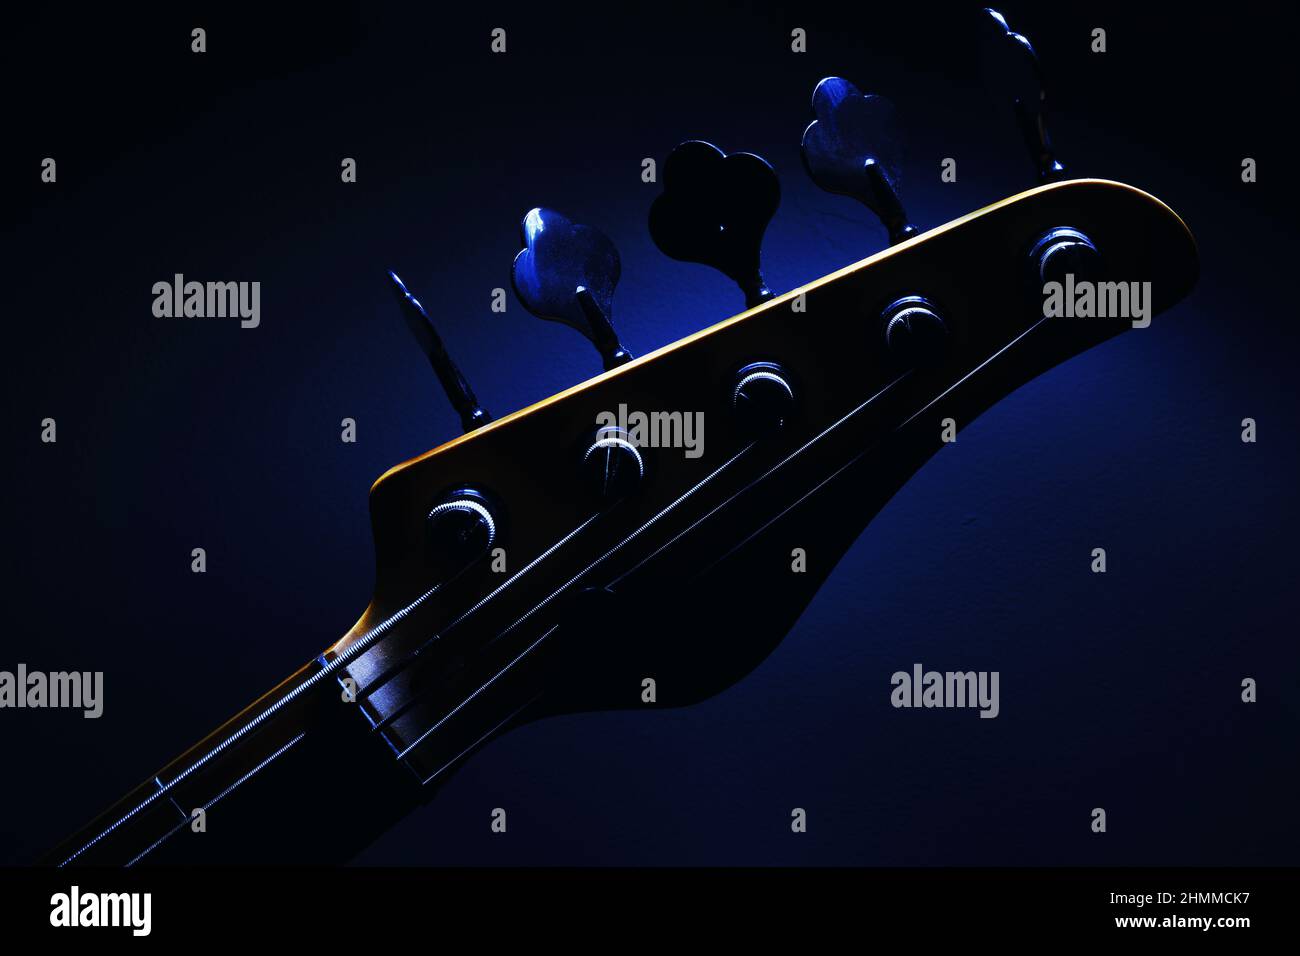 Closeup view of head of five strings bass guitar, highlighted shapes. Stock Photo